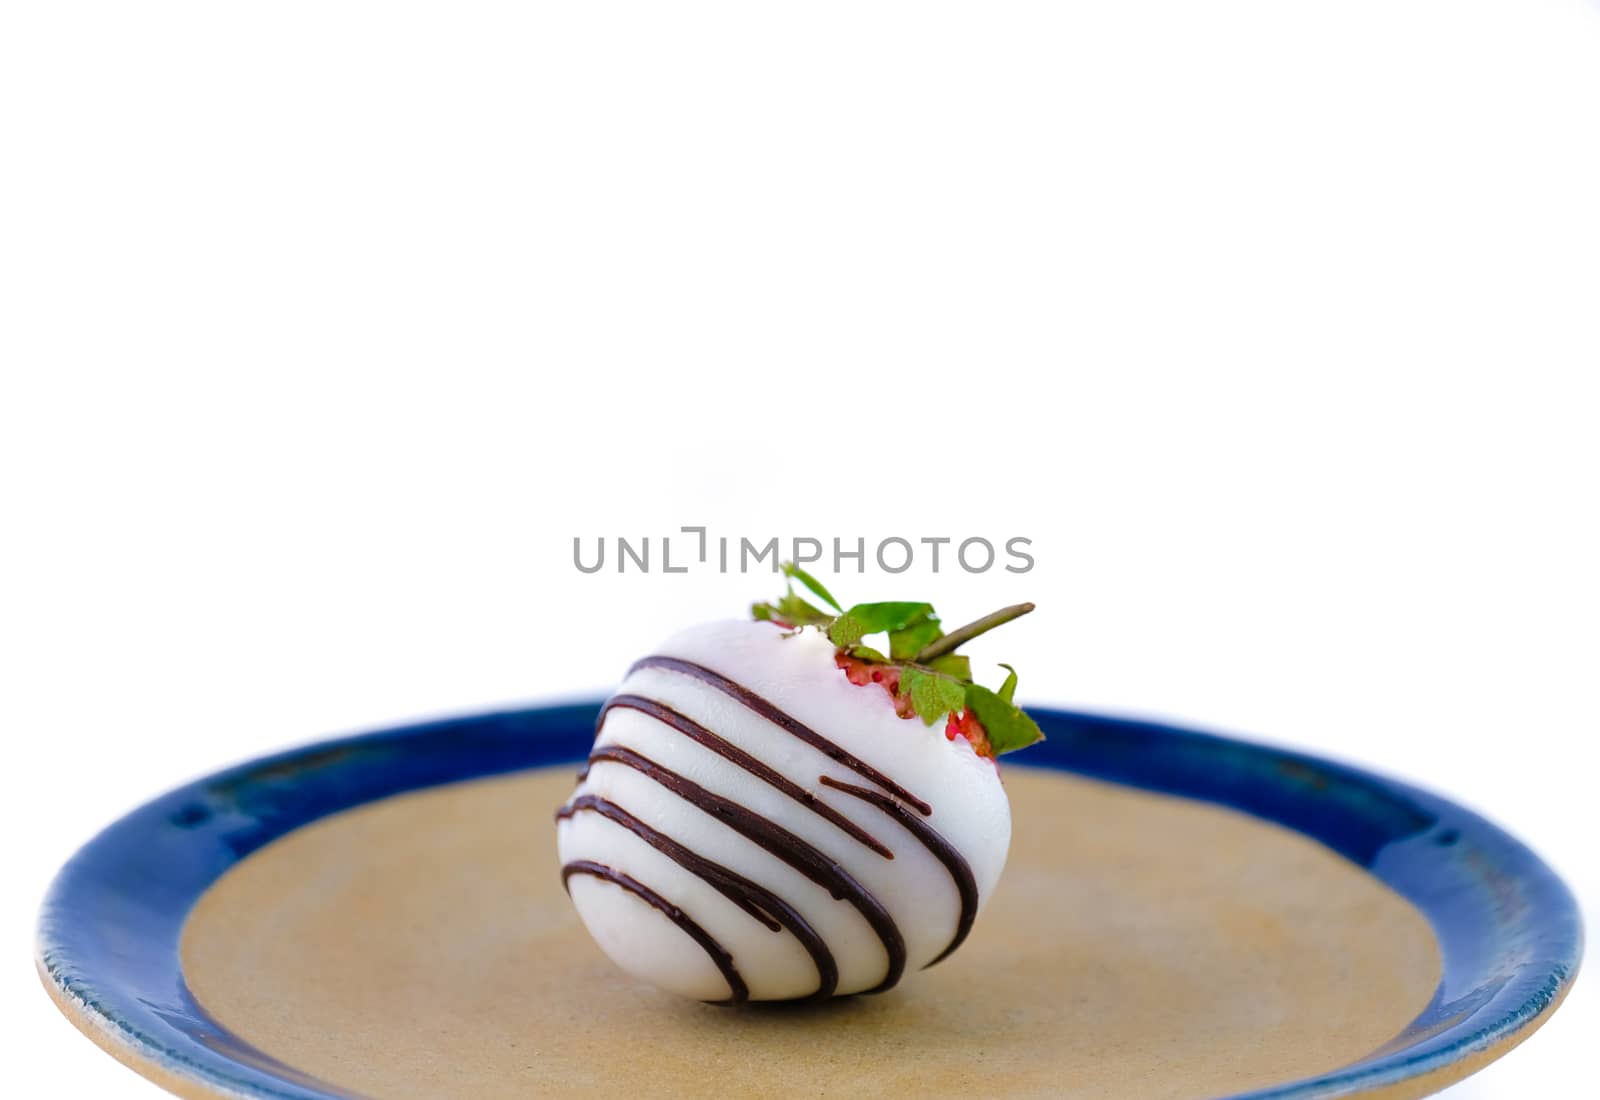 white chocolate coated strawberry on a ceramic plate, white background